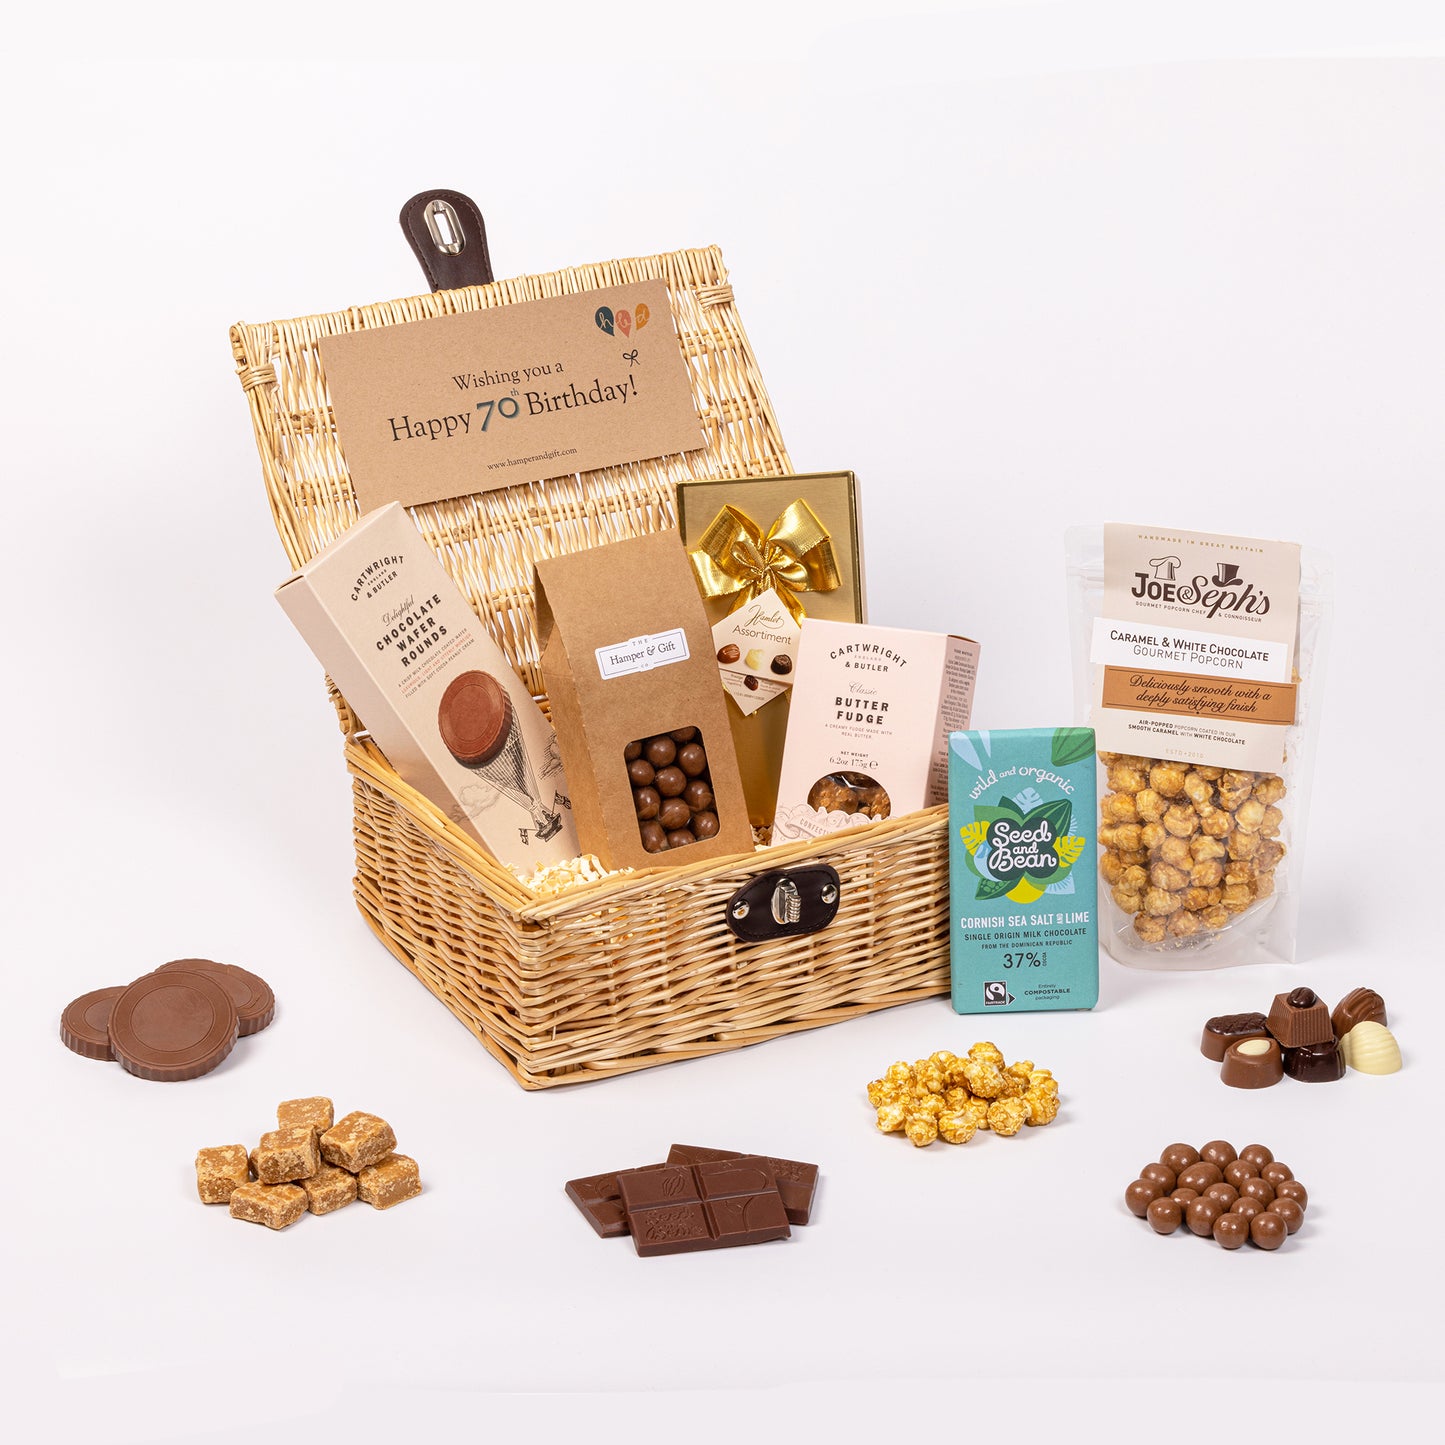 70th Birthday Chocolate & Fudge Hamper filled with a variety of chocolate, fudge, biscuit and gourmet popcorn